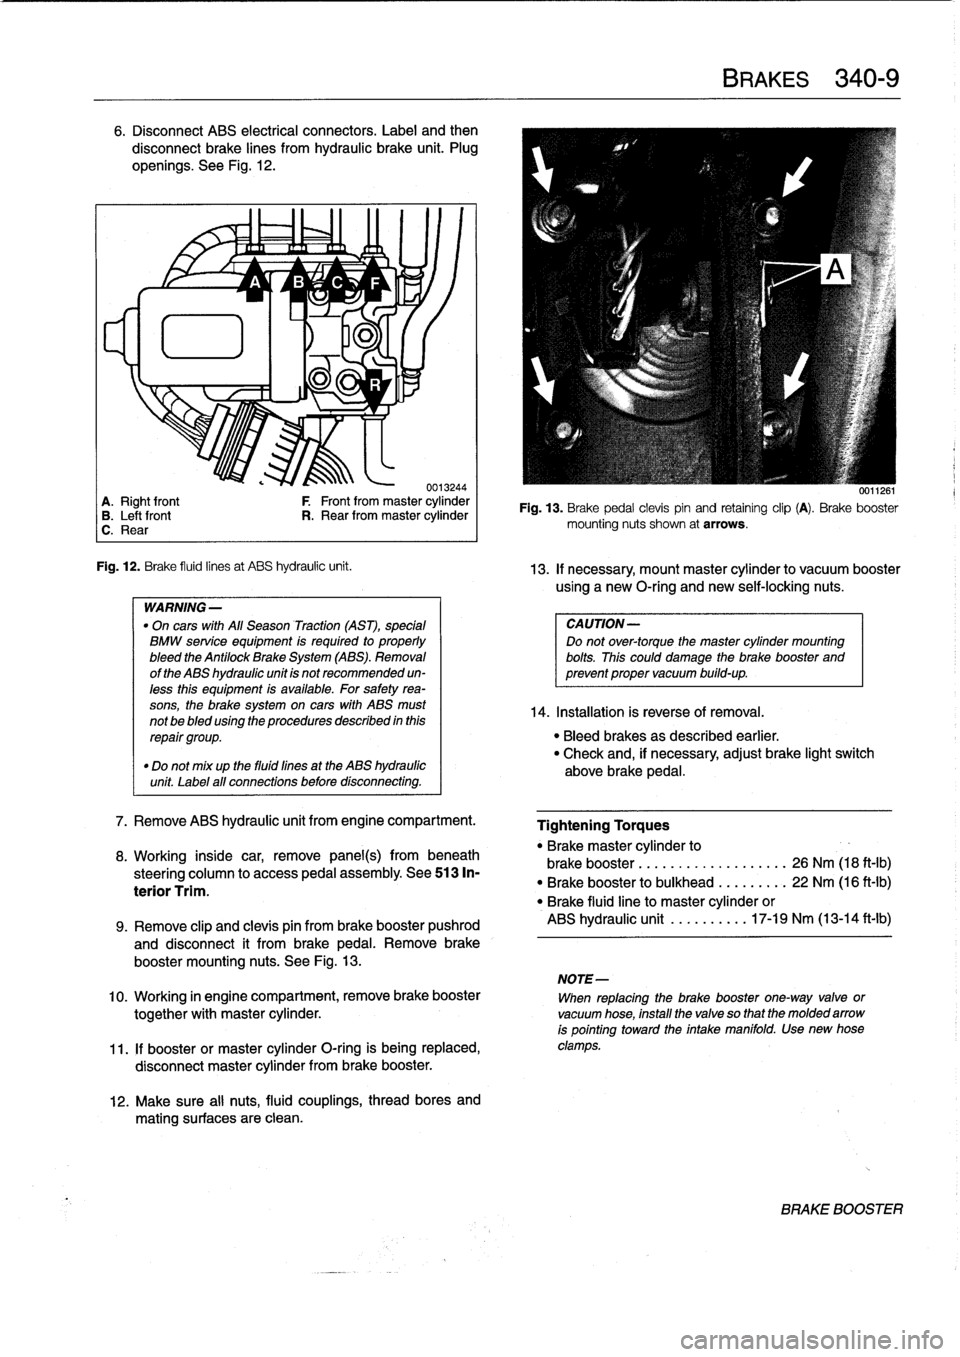 BMW 323i 1993 E36 Owners Guide 6
.
Disconnect
ABS
electrical
connectors
.
Label
and
then

disconnect
brake
lines
from
hydraulic
brake
unit
.
Plug

openíngs
.
See
Fig
.
12
.

~
~
A
1/
B
1v
C
~
F

lu
11
-ri
J
.

0013244
A
.
Right
f